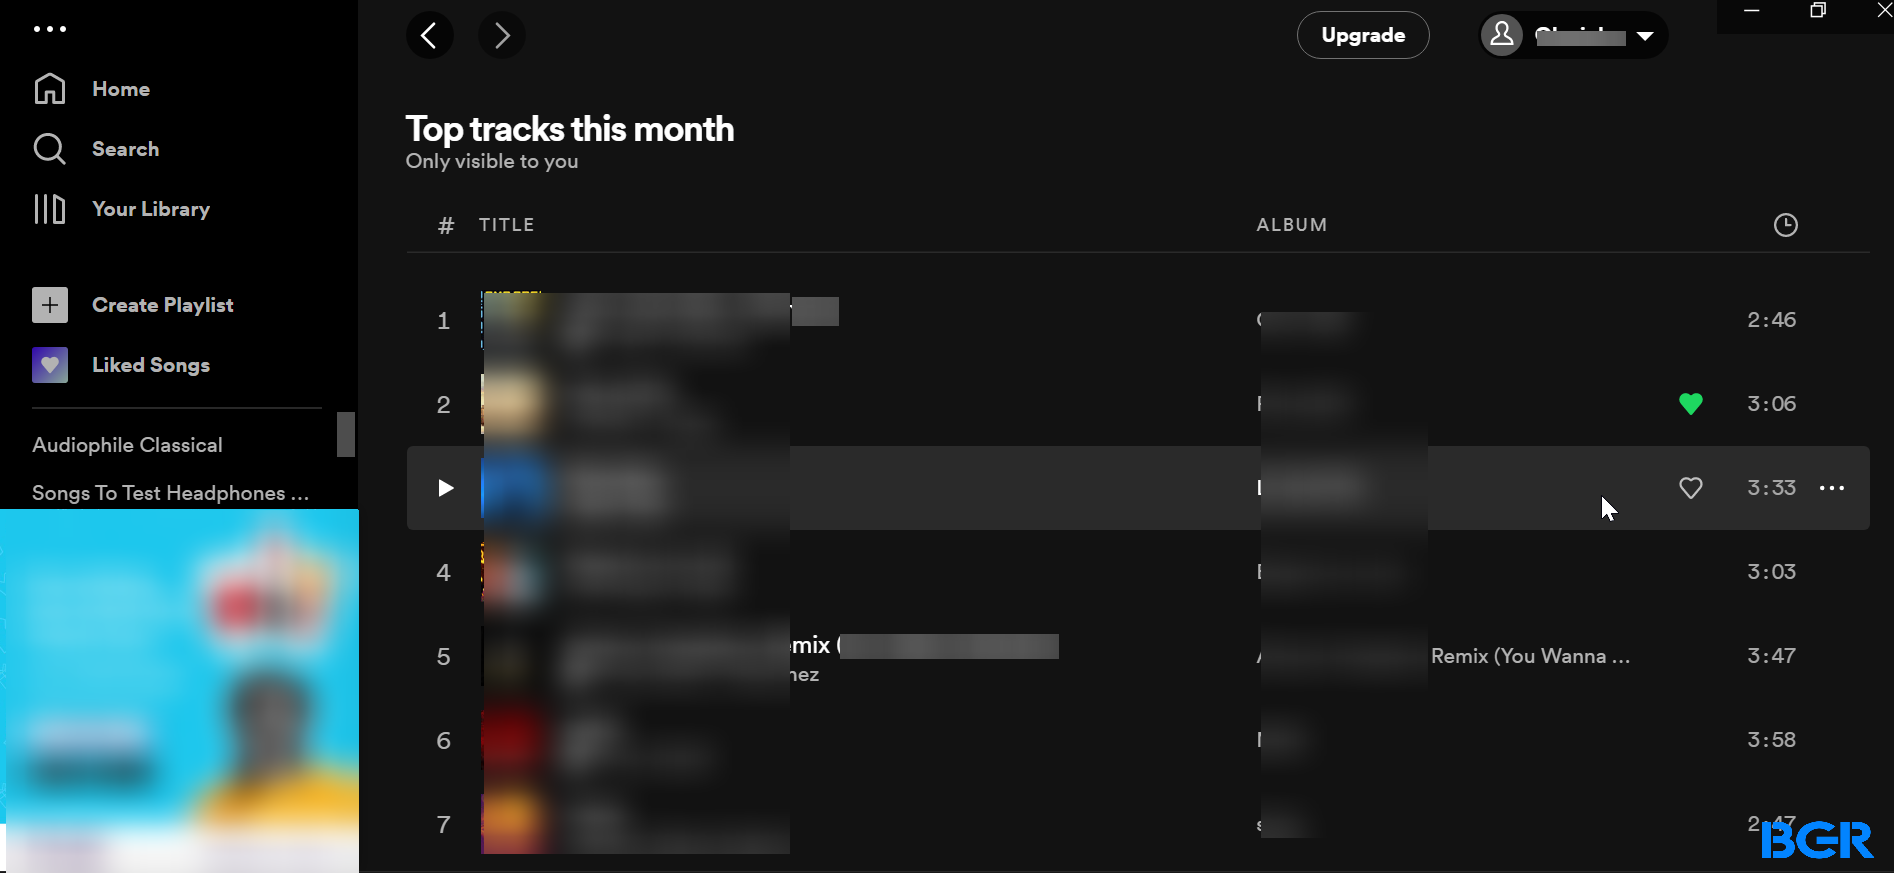 Spotify Stats-Full list of top songs of the month 